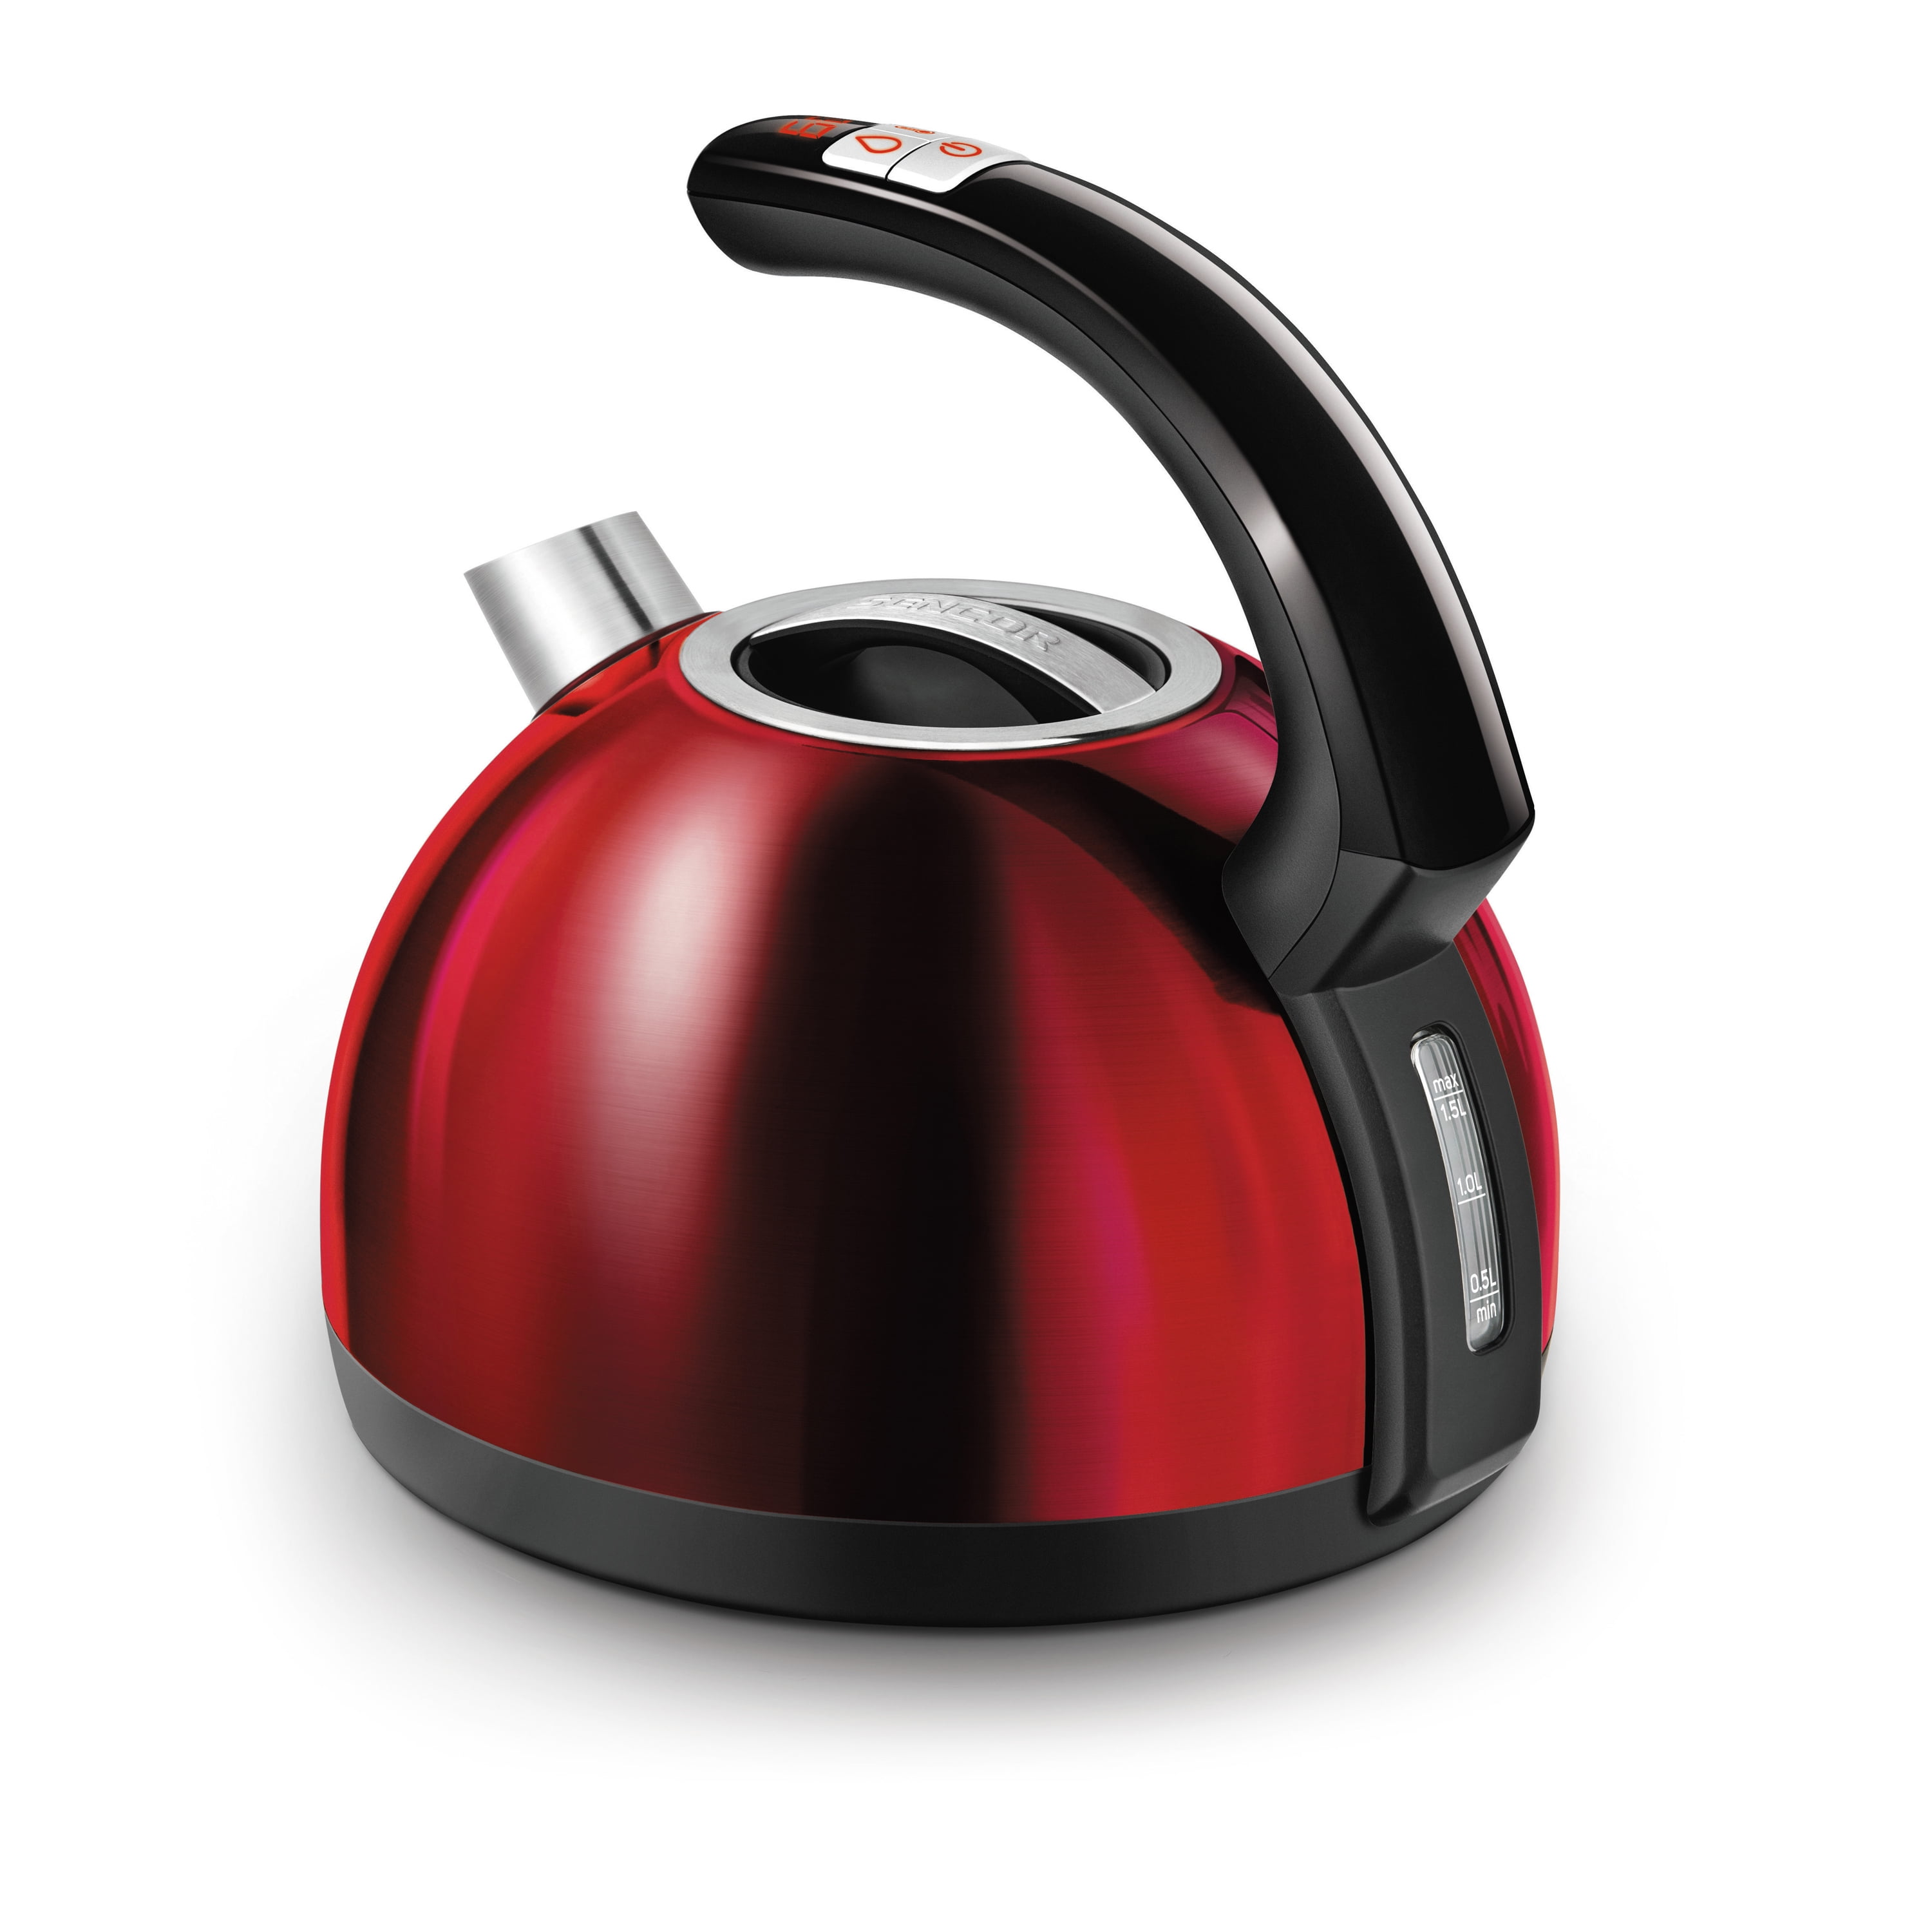 Icookpot Multi-use Electric Kettle - Used 1 Time for Sale in Sun